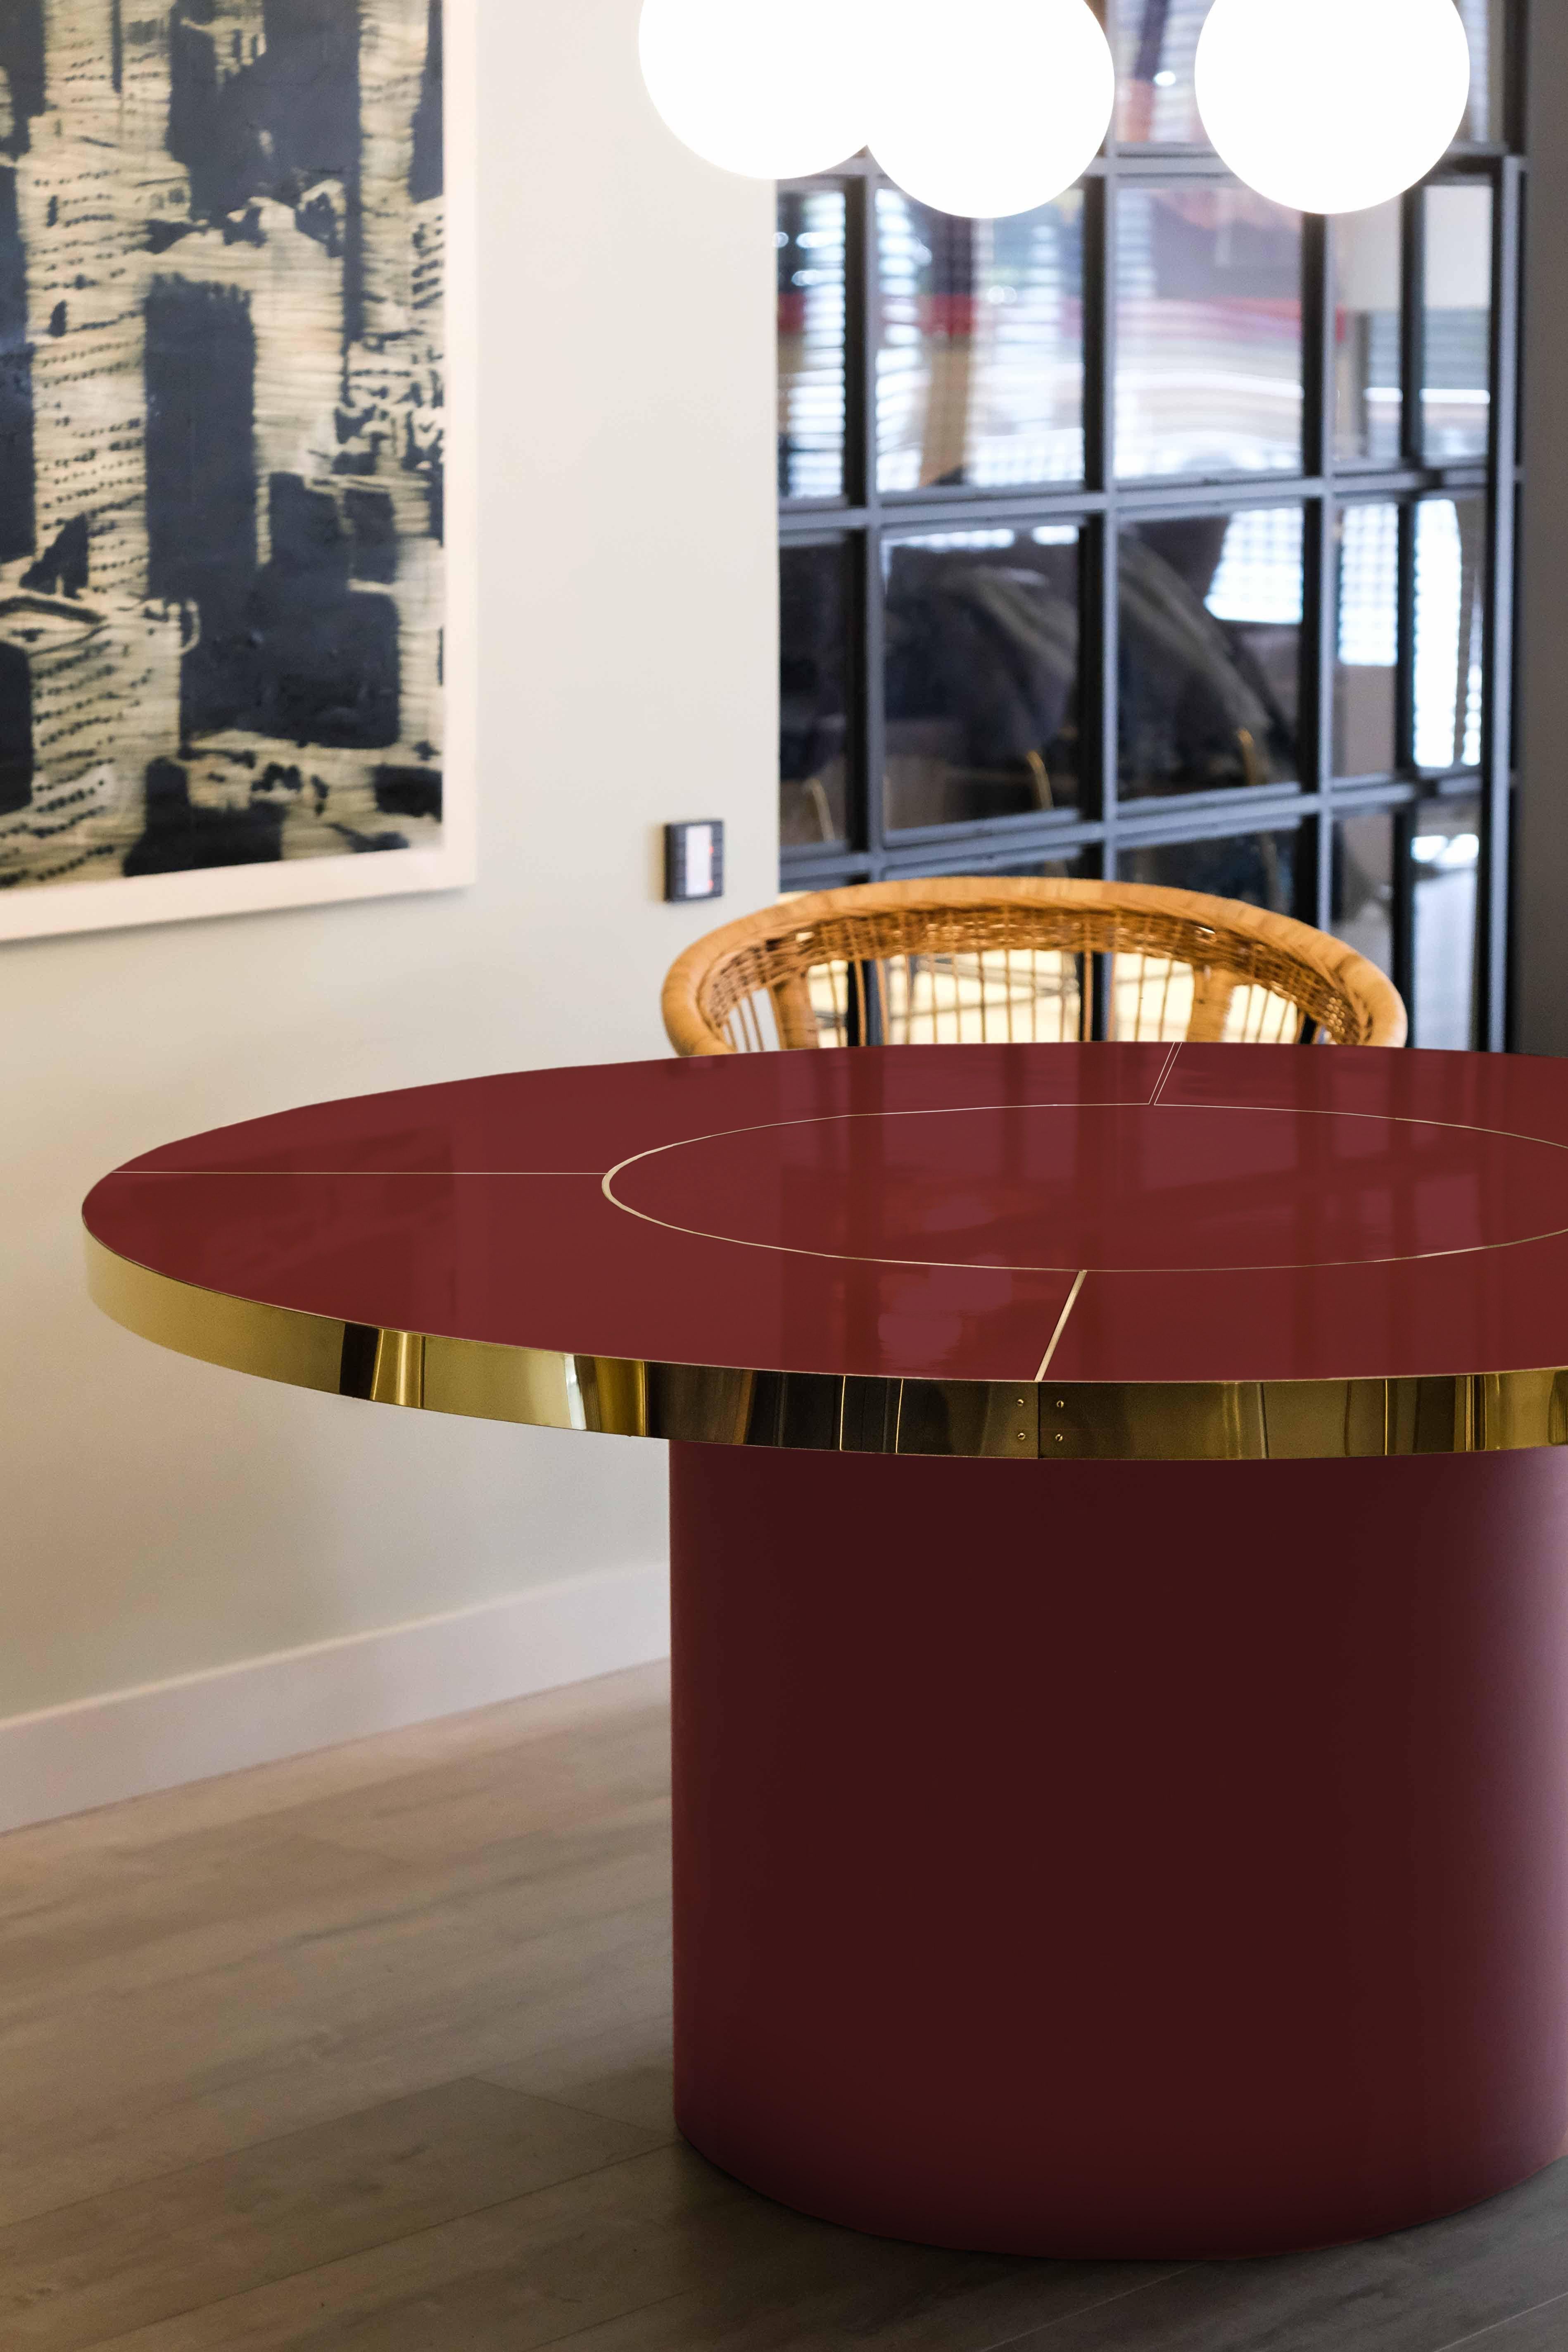 Retro Design Round Dining Table Palm Springs Style High Gloss Laminated & Brass Details Extra Large Size

Discover our incredible collection of retro-style design tables inspired by the iconic decoration of the 1950s, 60s, and 70s of Palm Springs in